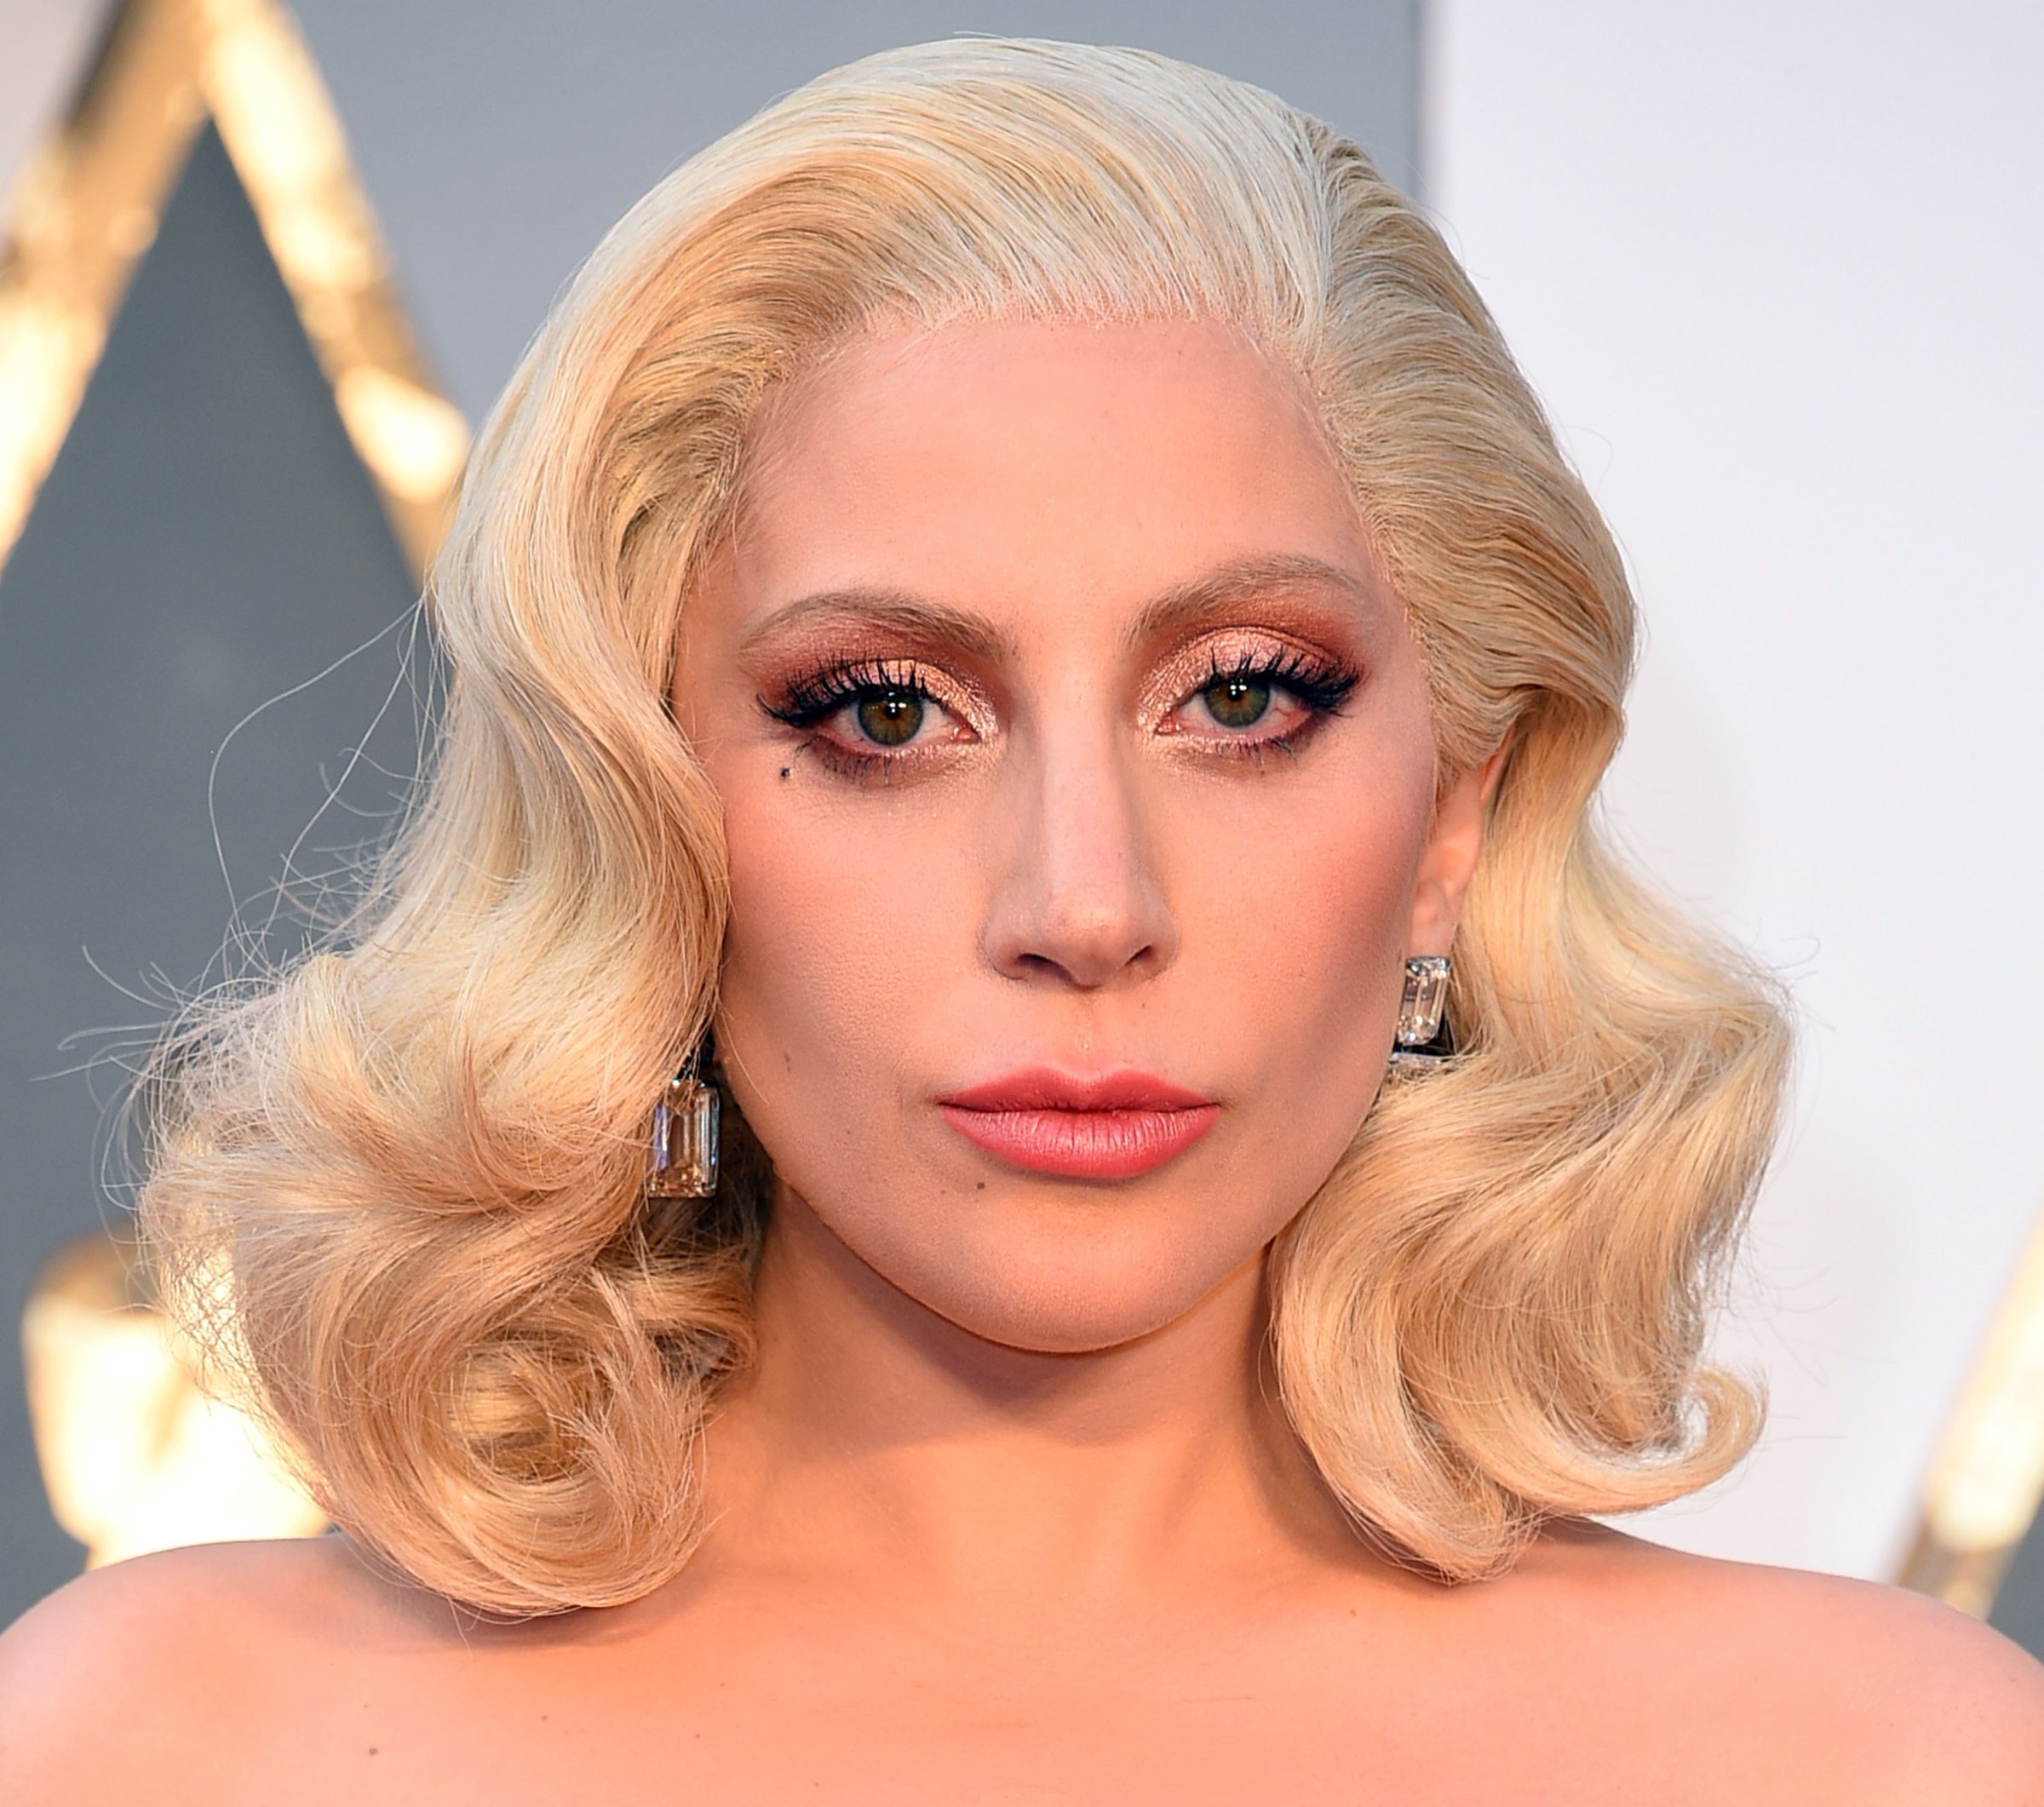 Lady Gaga arrives at the 88th Annual Academy Awards at Hollywood &amp; Highland Center on February 28, 2016 in Hollywood, California.